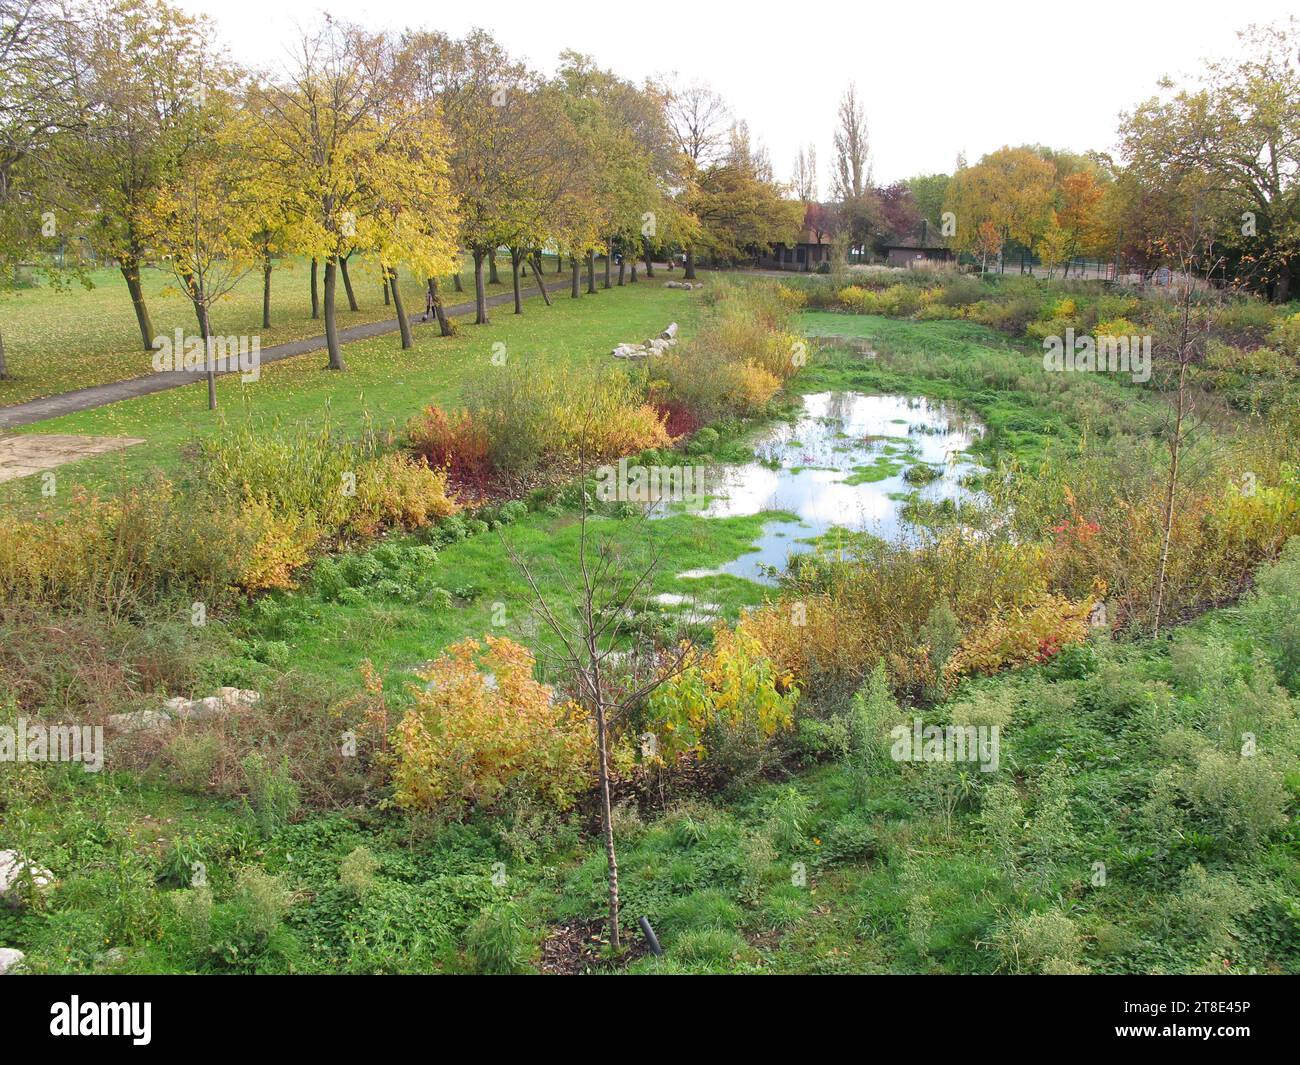 Flood mitigation scheme in Memorial Park, Chingford, London, UK. A Sustainable Urban Drainage Scheme (SUDS) to absorb rain water. Stock Photo